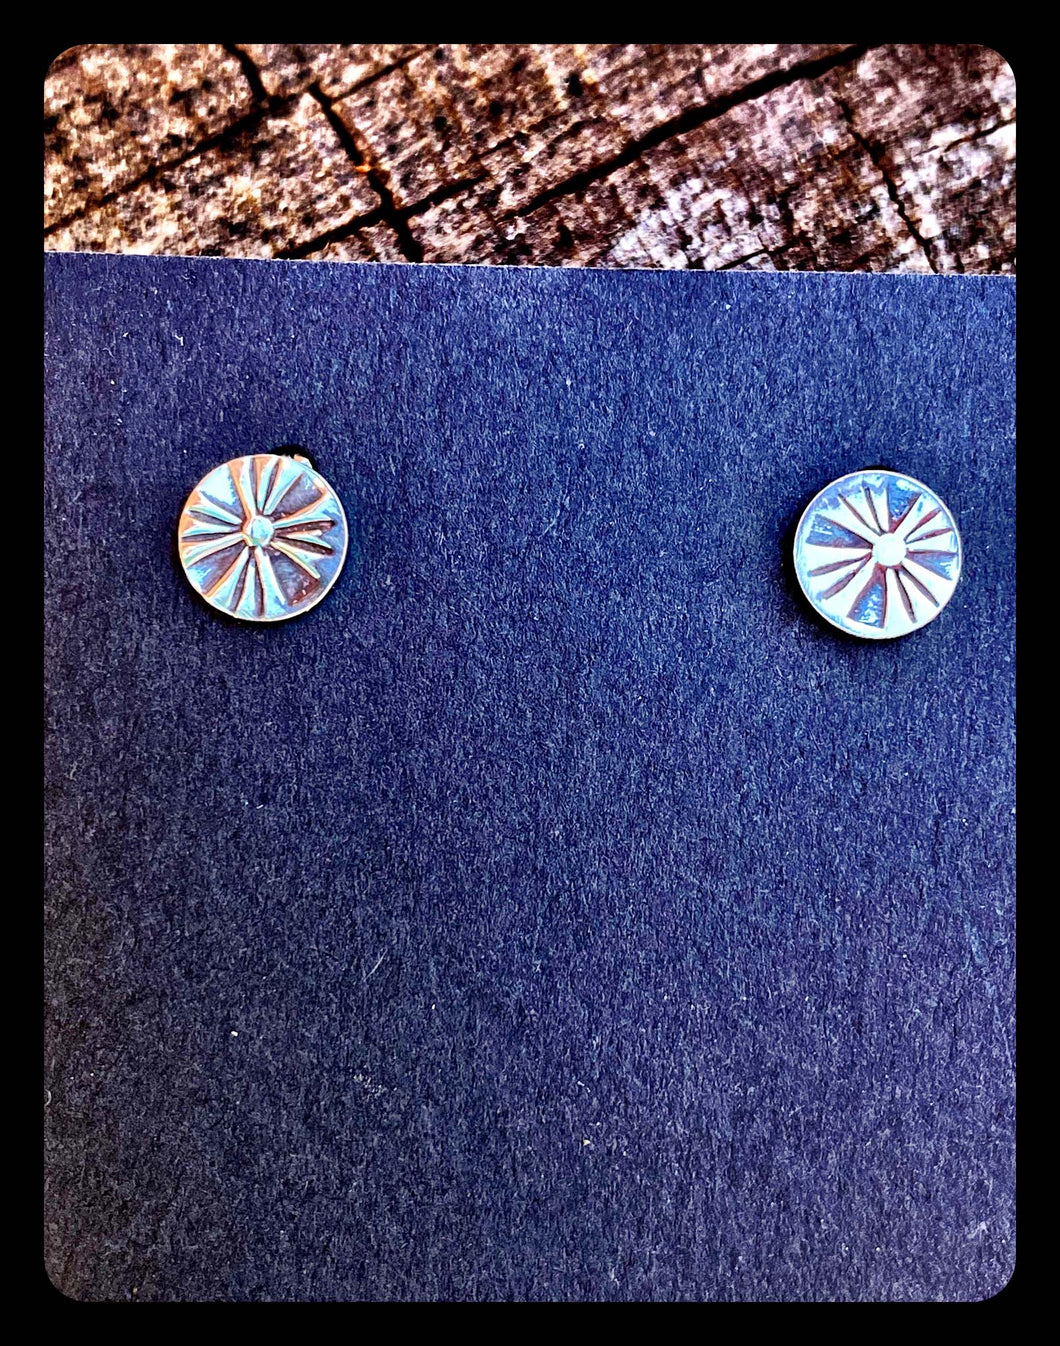 Four Directions Earrings